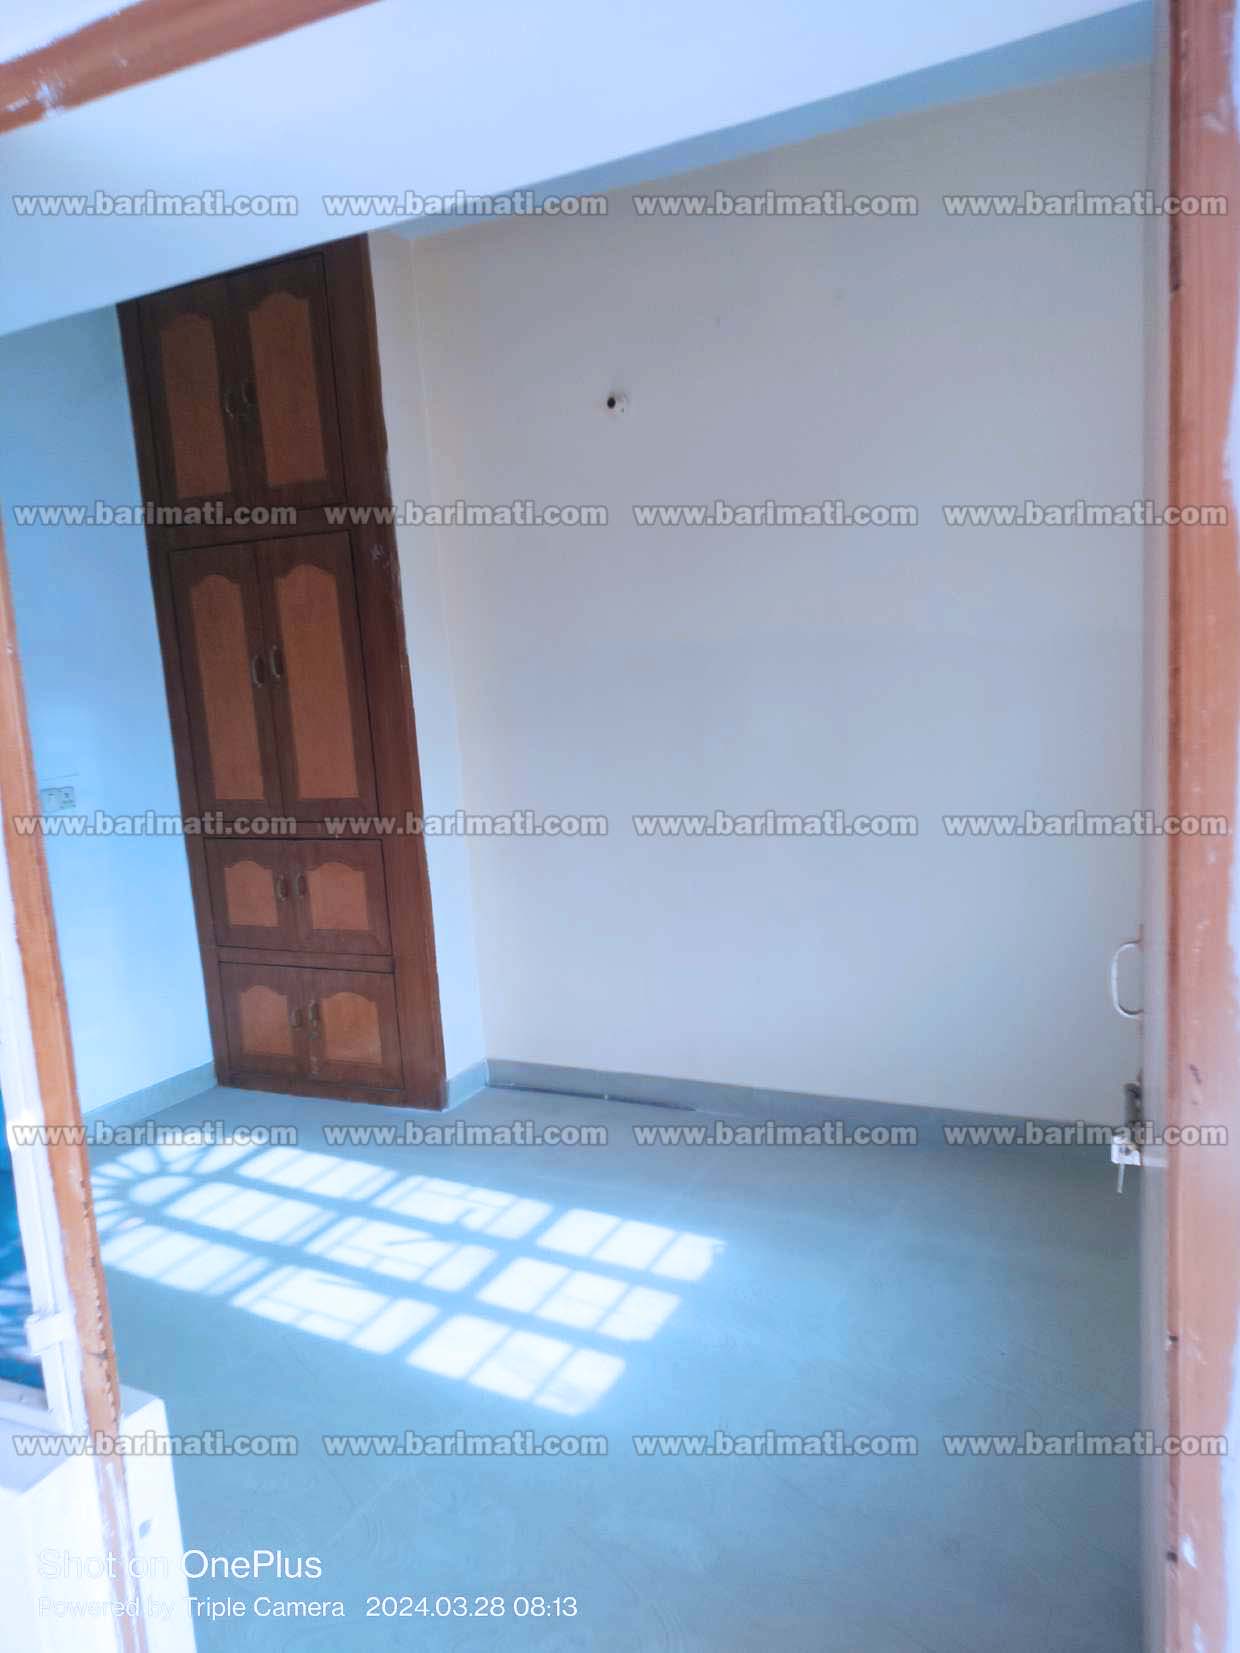 Budget-friendly 2 BHK house for rent in East Ram Krishna Nagar, Patna, under 10000 per month, with included car parking